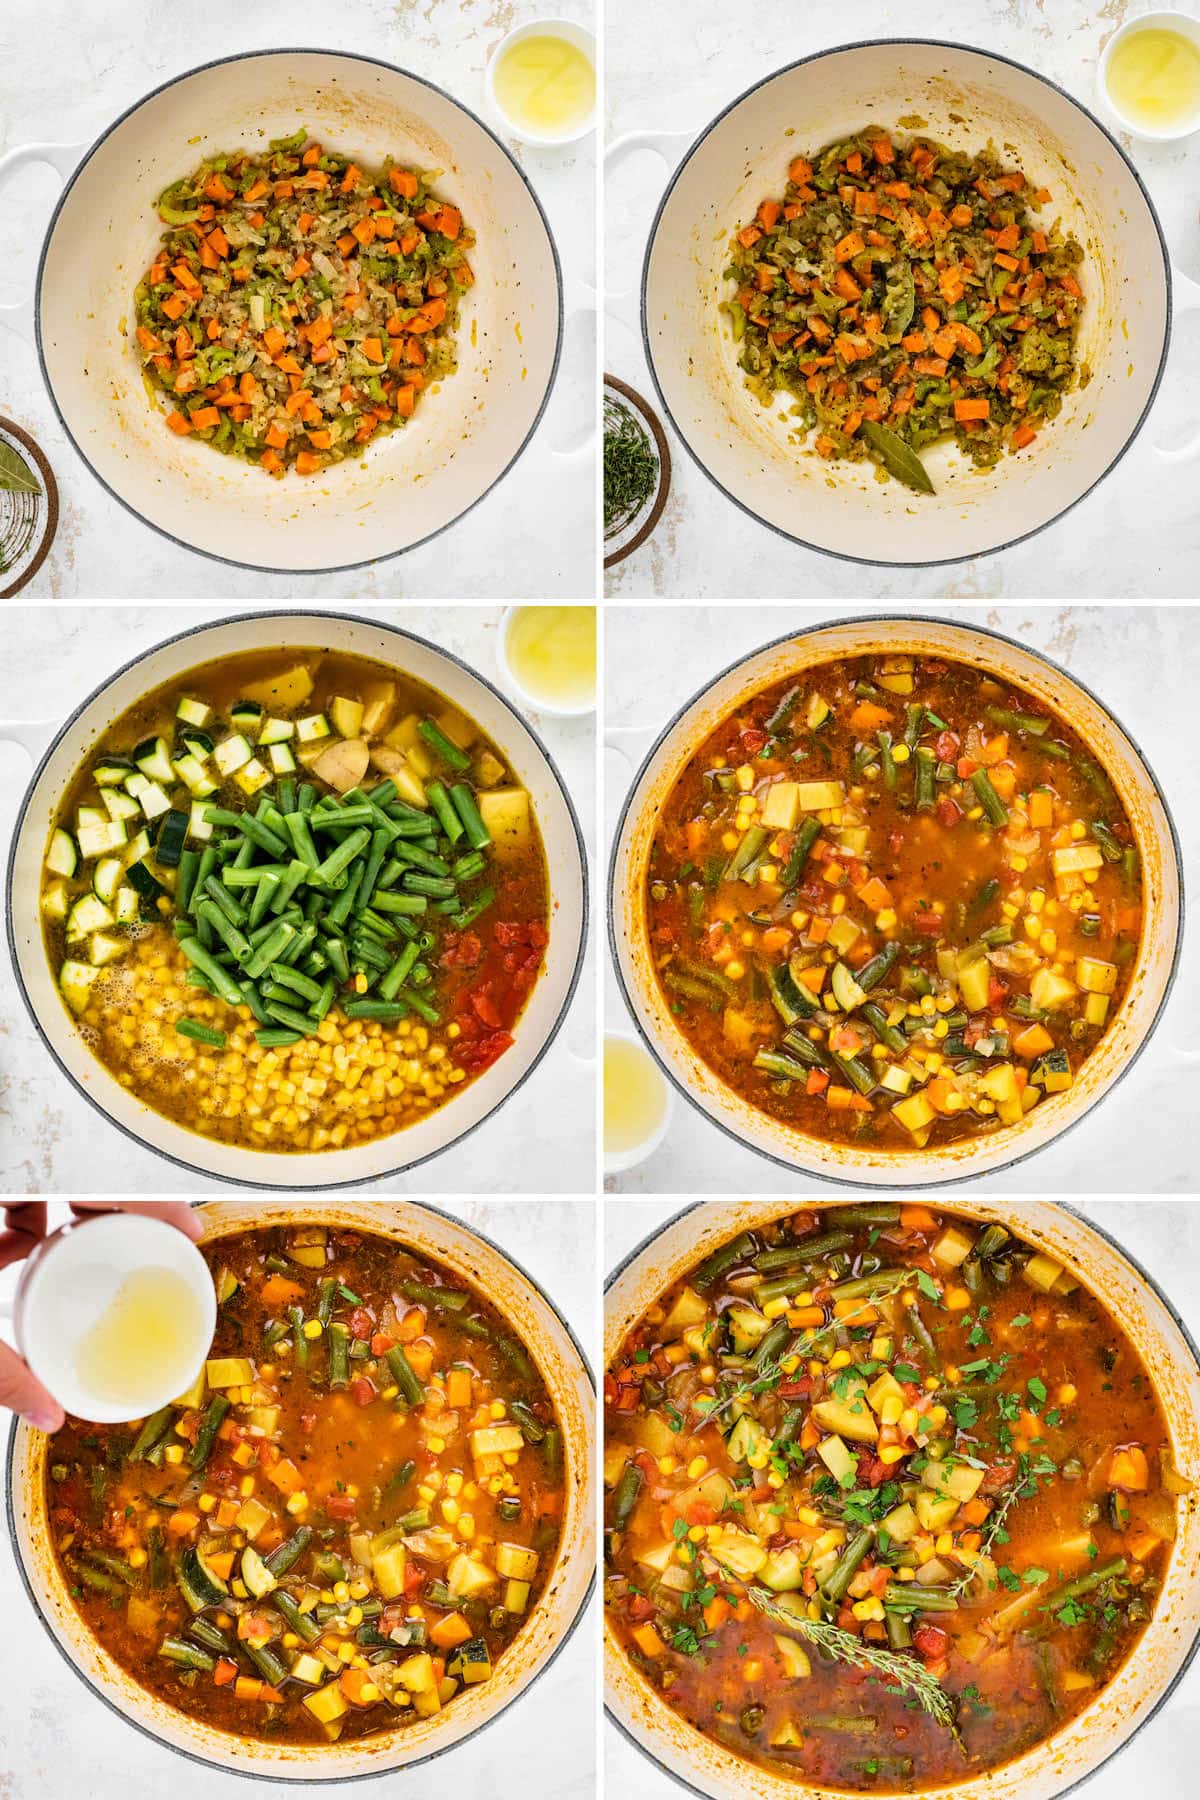 Six photos showing the steps to make homemade vegetable soup.